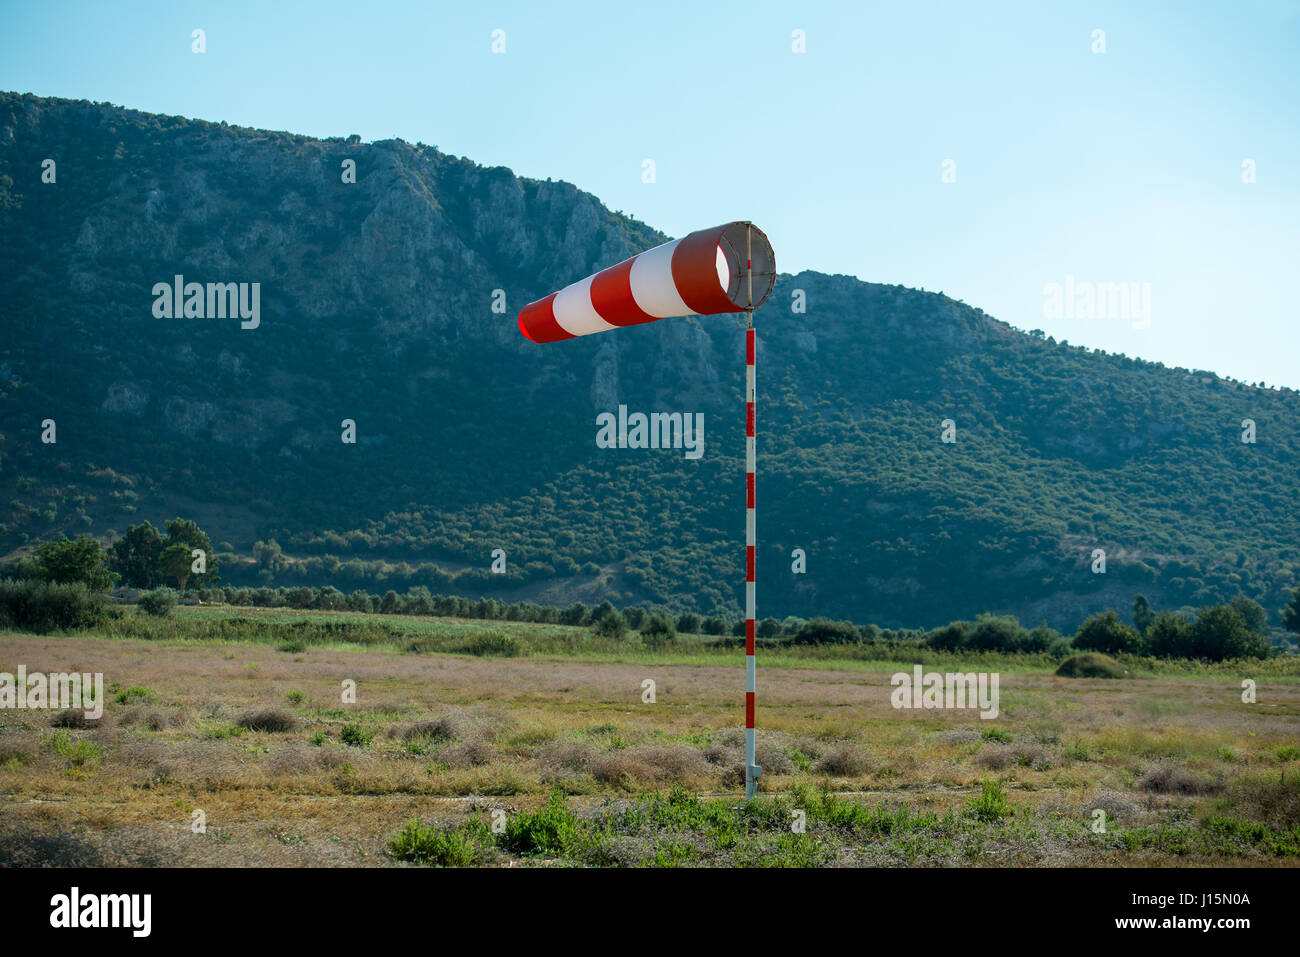 Horizontally flying windsock (wind vane) due to high wind. Blue sky and high mountains in the background. Stock Photo